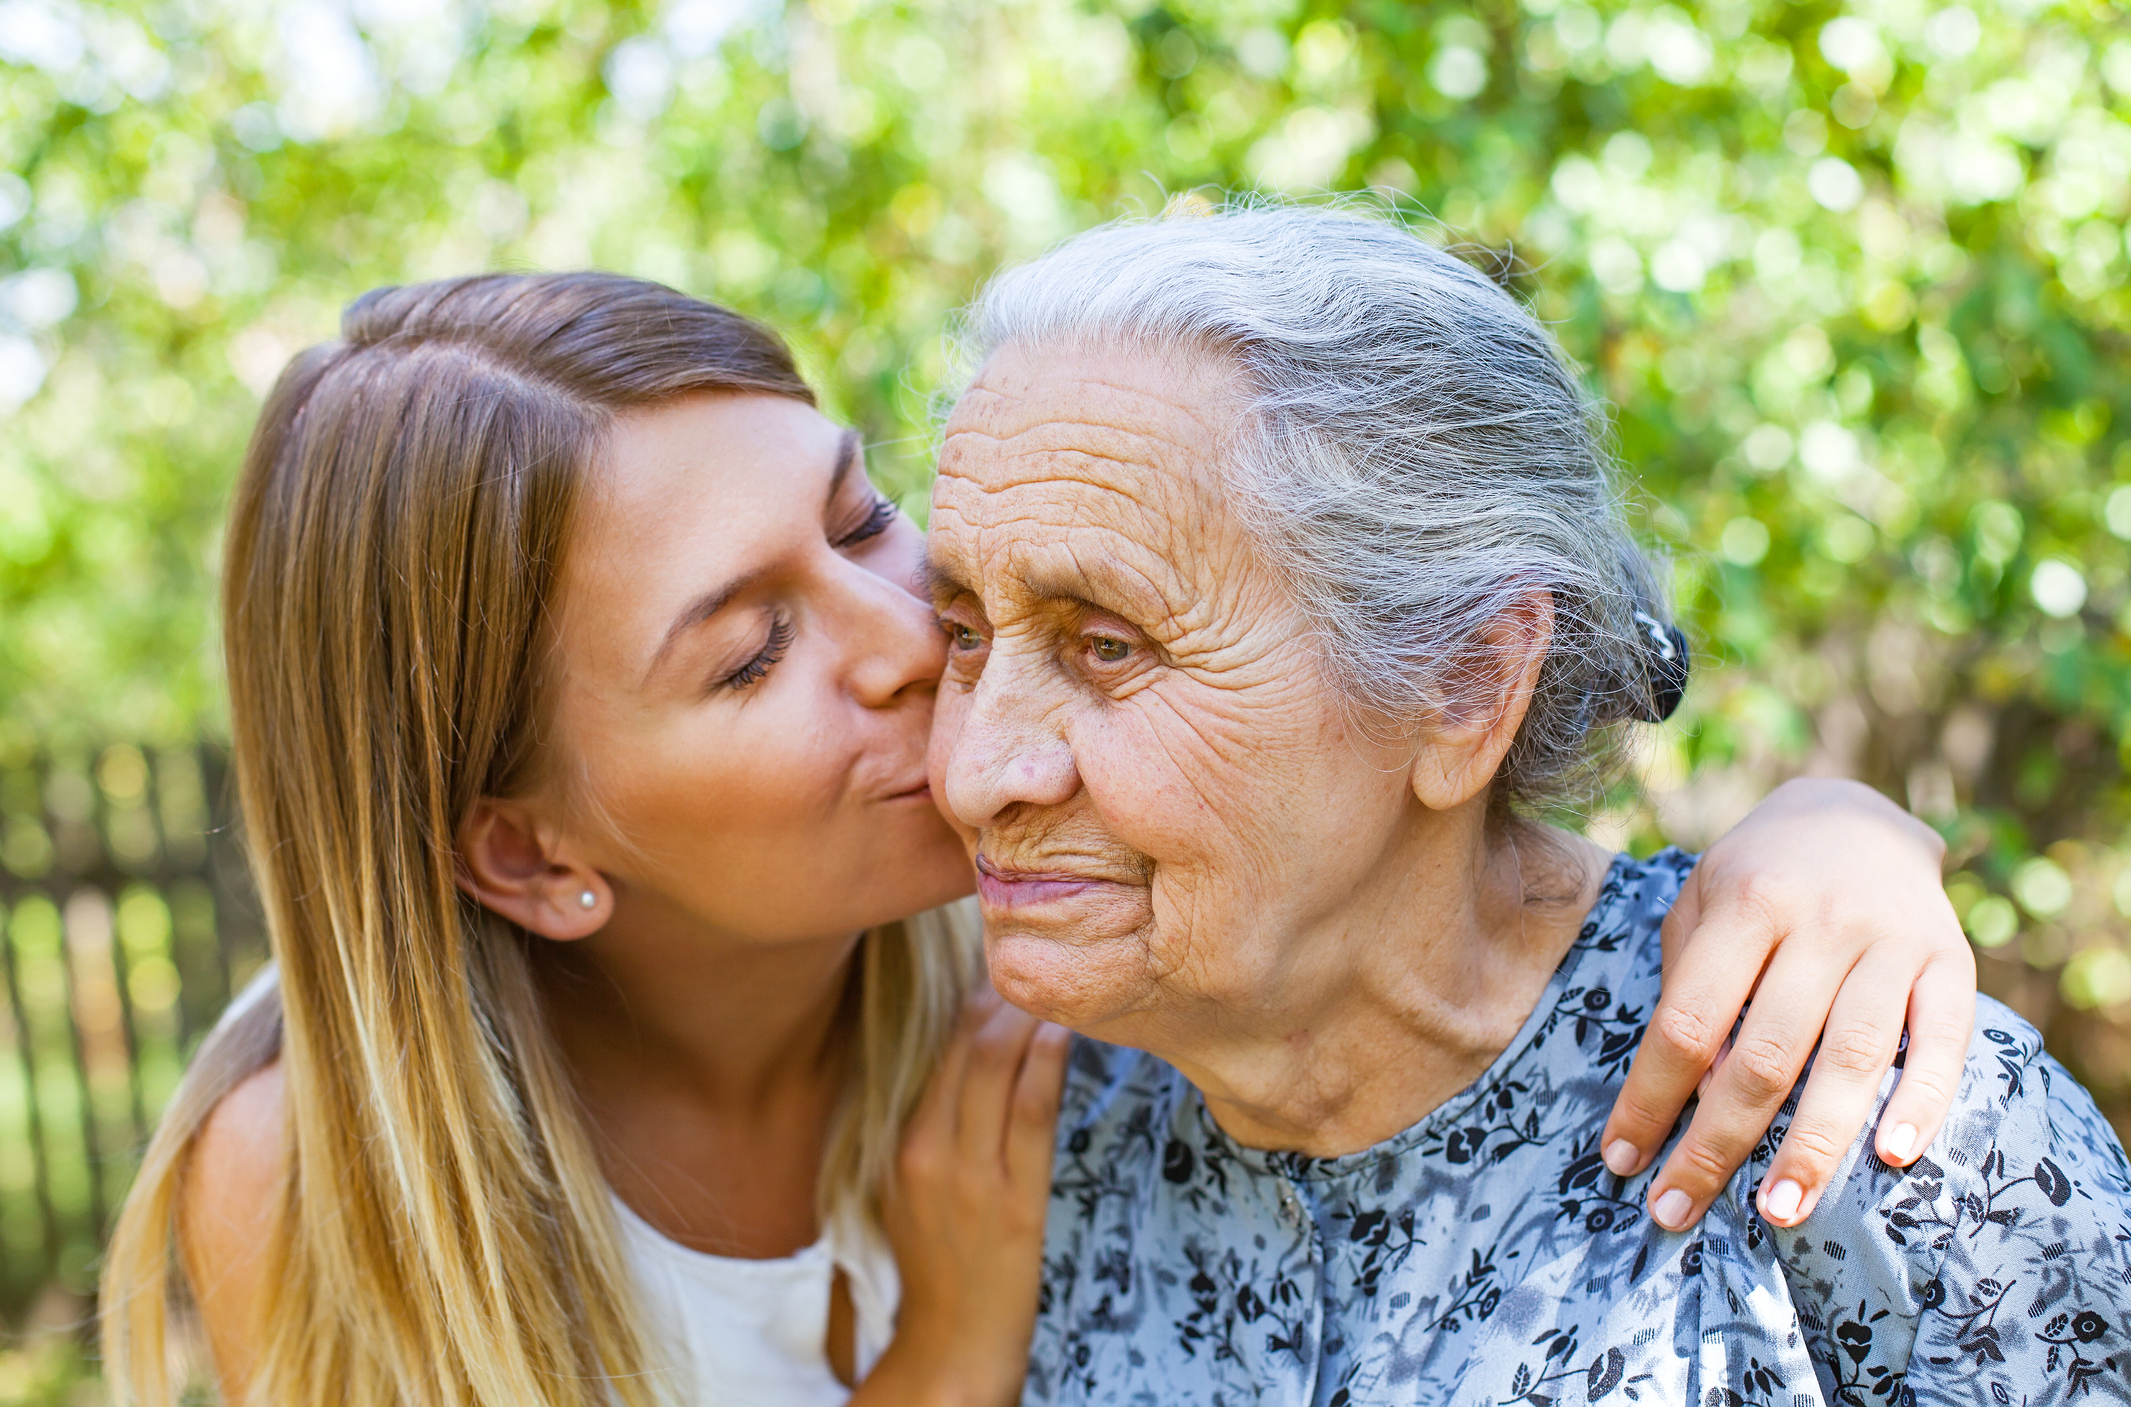 Young woman kissing an older woman with Alzheimer's disease on the cheek